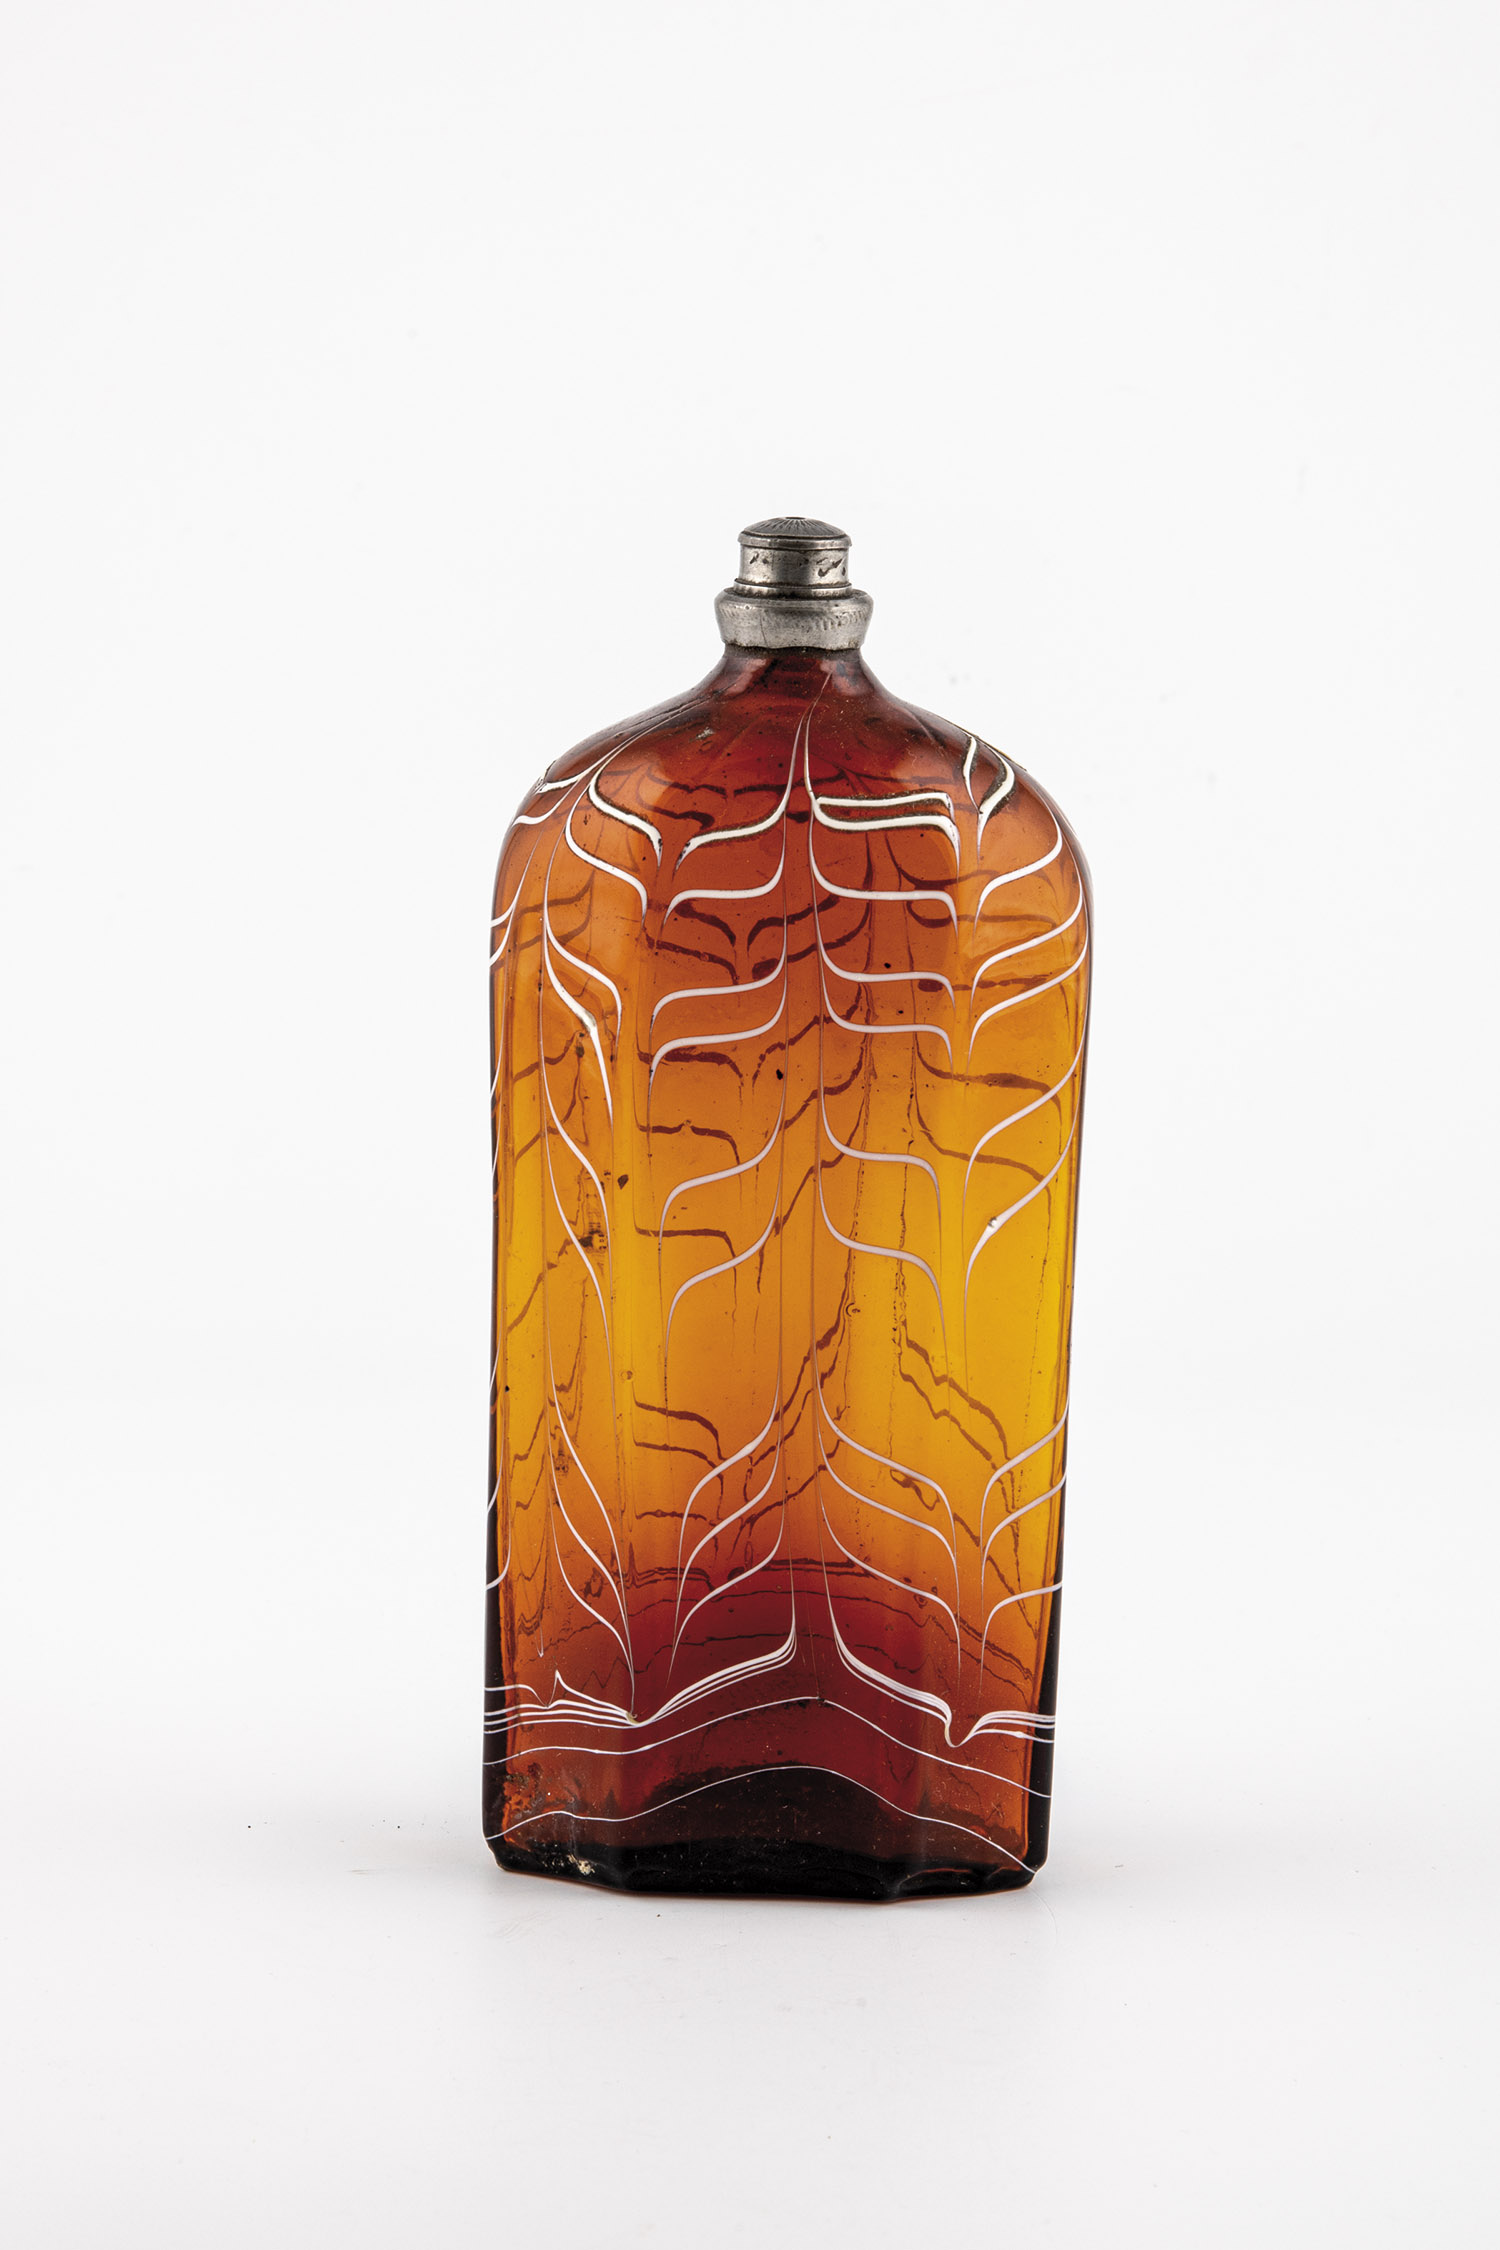 Rectangular bottle Alpine, 18th century Brown glass with slightly curved bottom and tear-off.